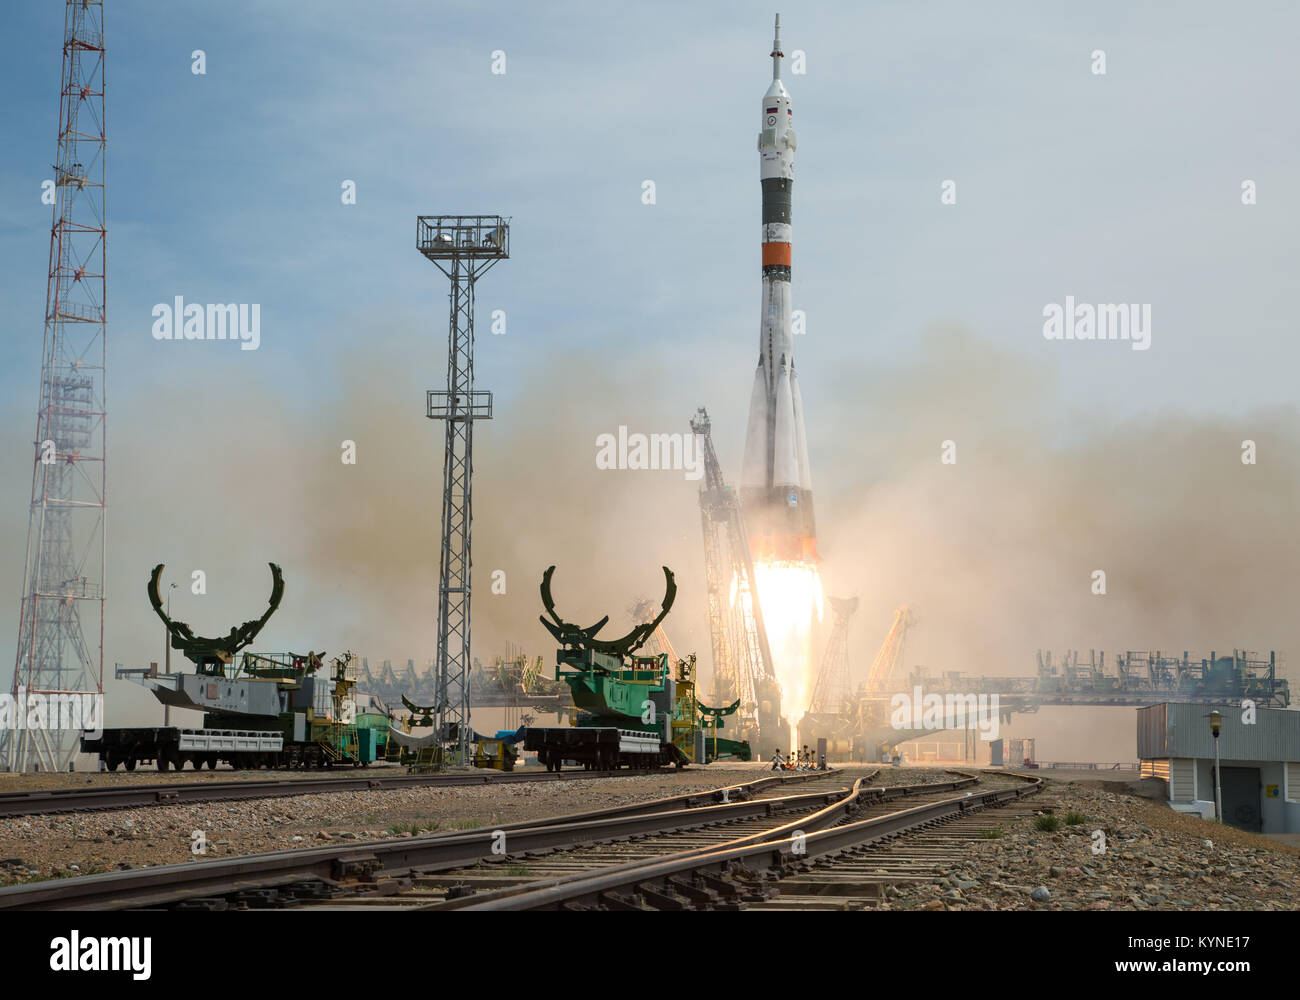 The Soyuz MS-04 rocket launches from the Baikonur Cosmodrome in Kazakhstan on Thursday, April 20, 2017 Baikonur time carrying Expedition 51 Soyuz Commander Fyodor Yurchikhin of Roscosmos and Flight Engineer Jack Fischer of NASA into orbit to begin their four and a half month mission on the International Space Station. (Photo Credit: NASA/Aubrey Gemignani) Stock Photo